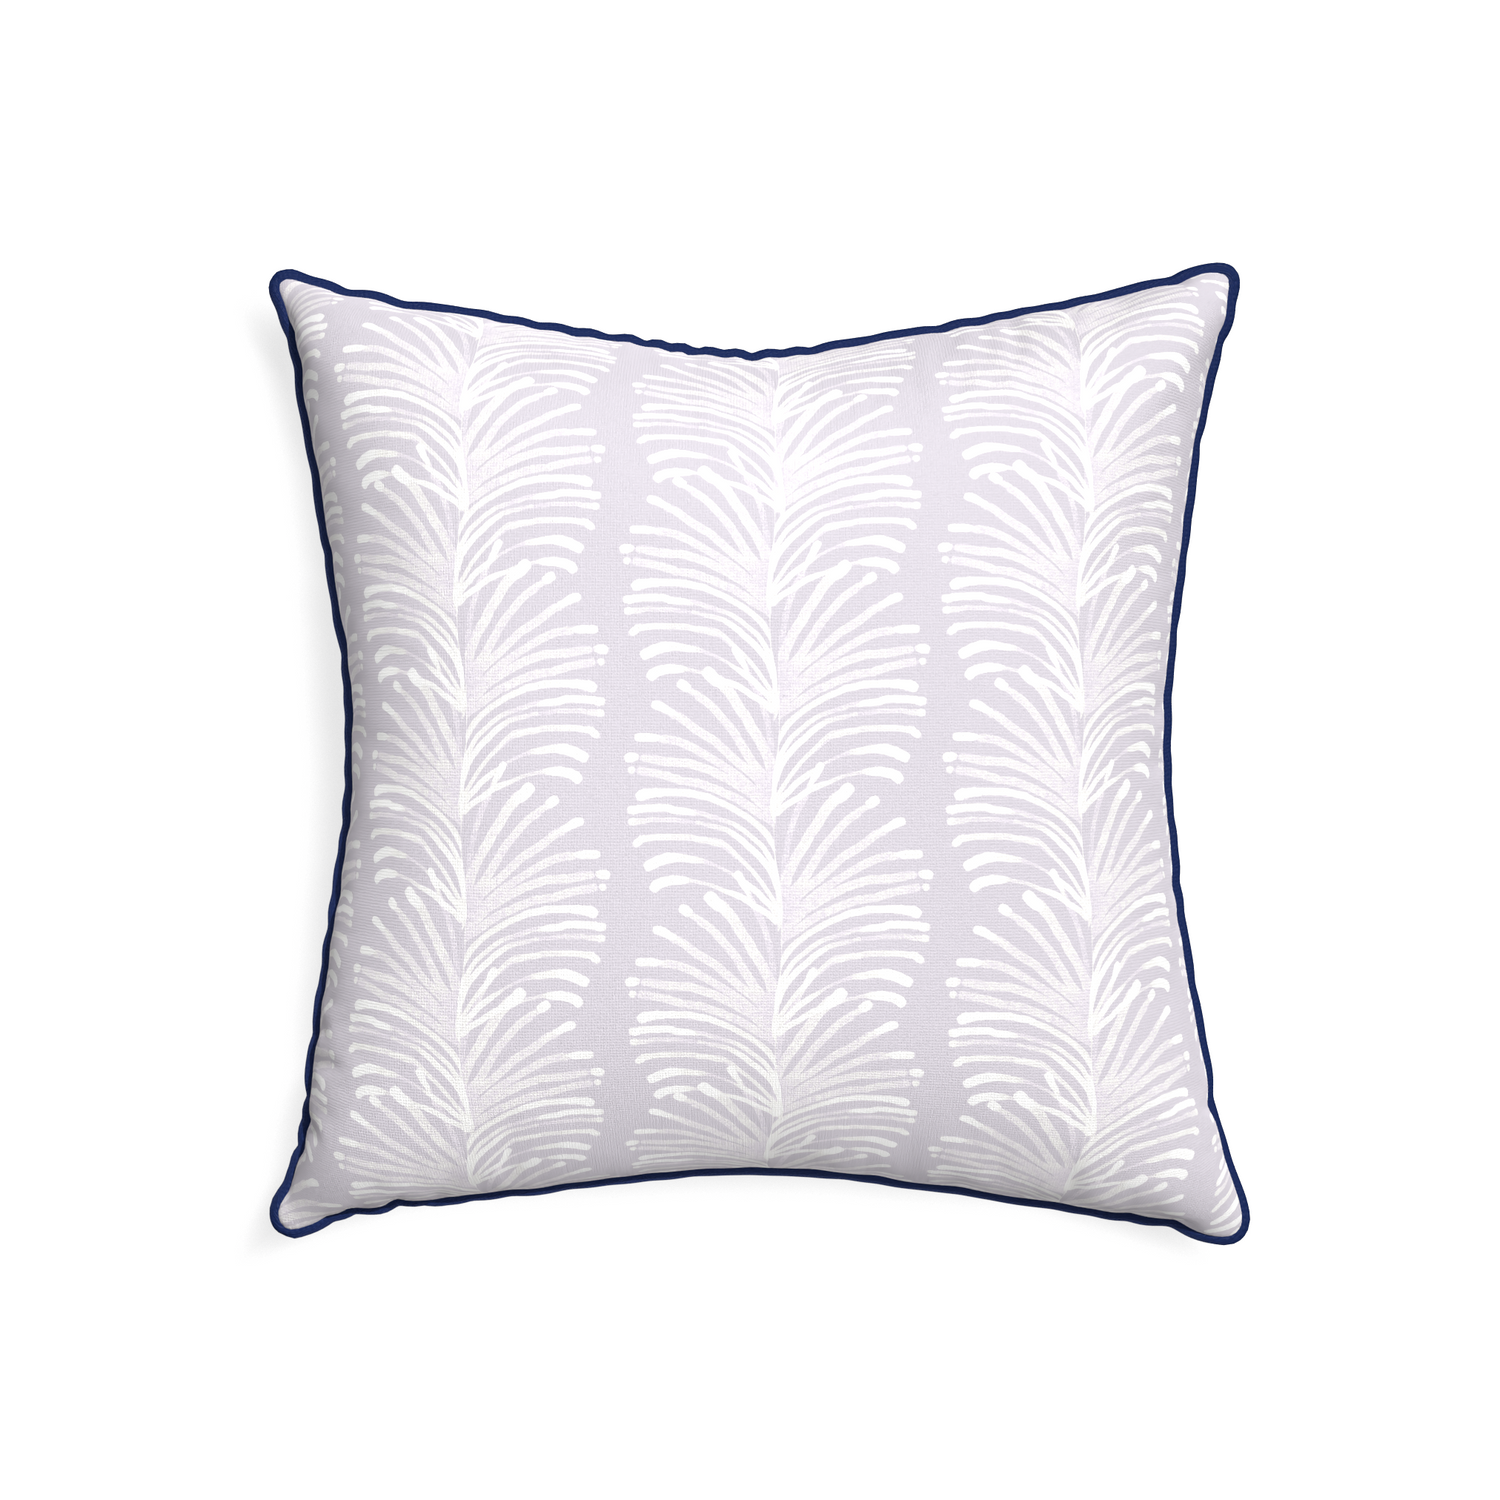 22-square emma lavender custom lavender botanical stripepillow with midnight piping on white background